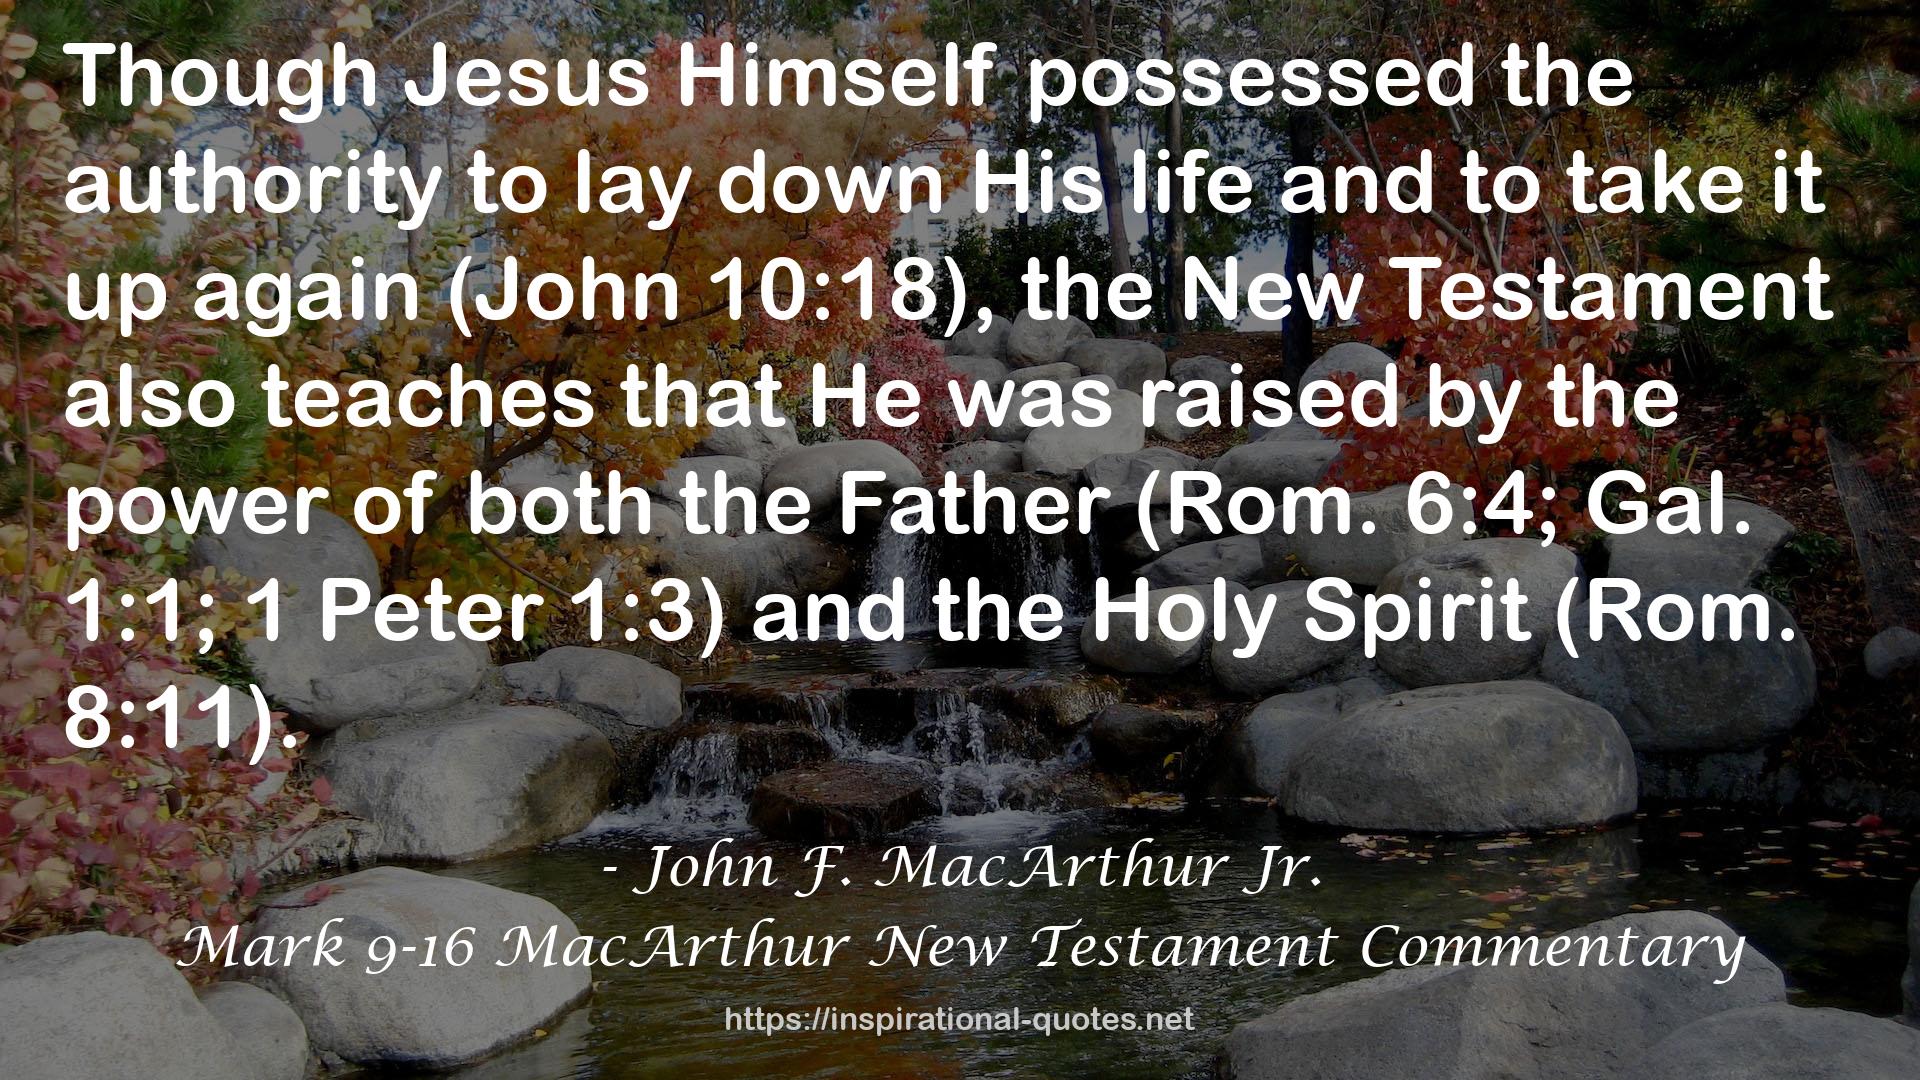 Mark 9-16 MacArthur New Testament Commentary QUOTES